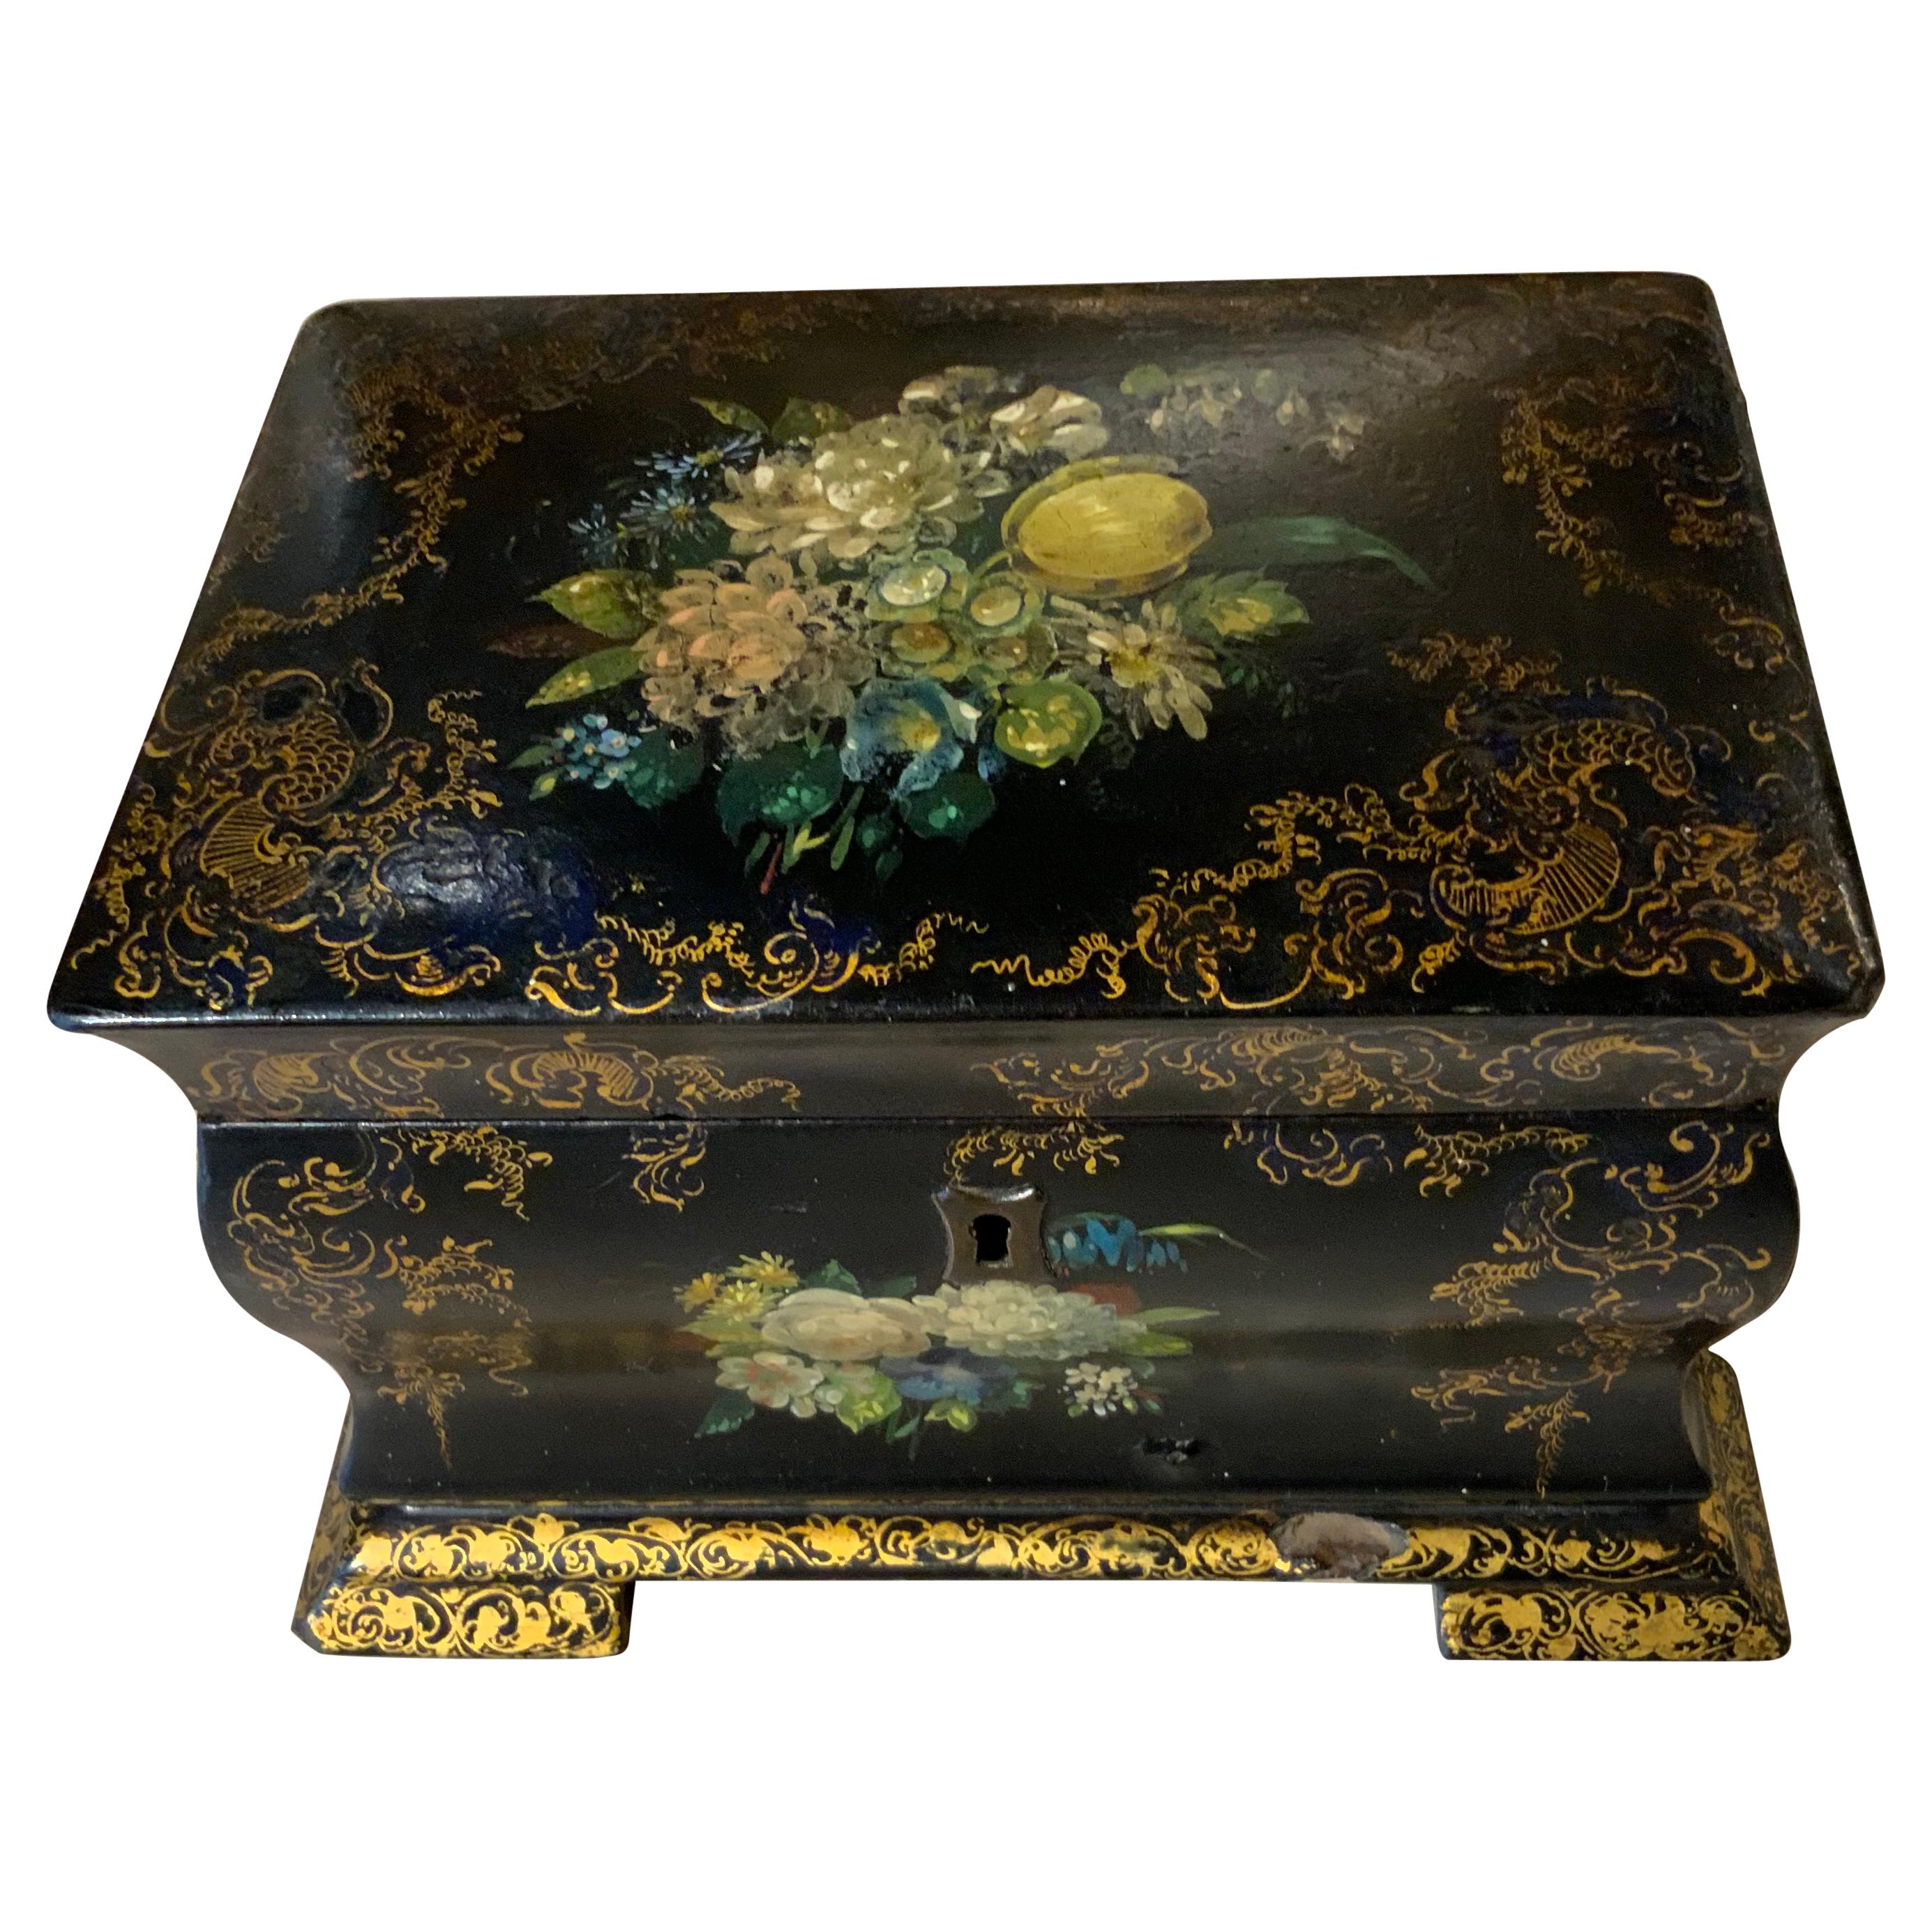 Papier-Mâché Tea Caddie /1850 with Floral and Foliate Designs with Black Ground For Sale